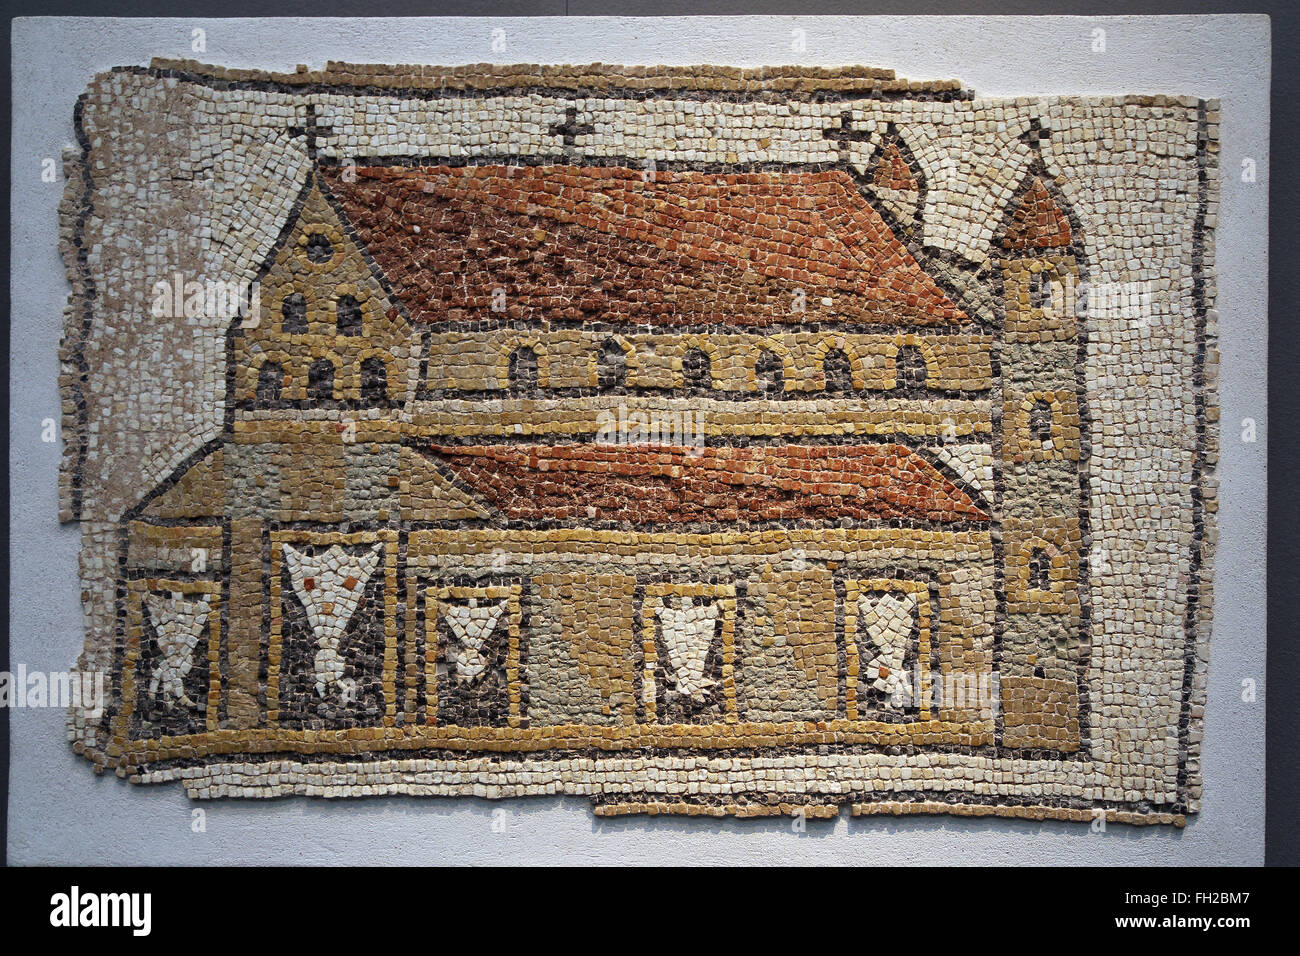 Roman mosaic of a Church with Towers, Eastern Mediterranean, 5th century AD. The church has three naves. Early Roman Christian. Stock Photo